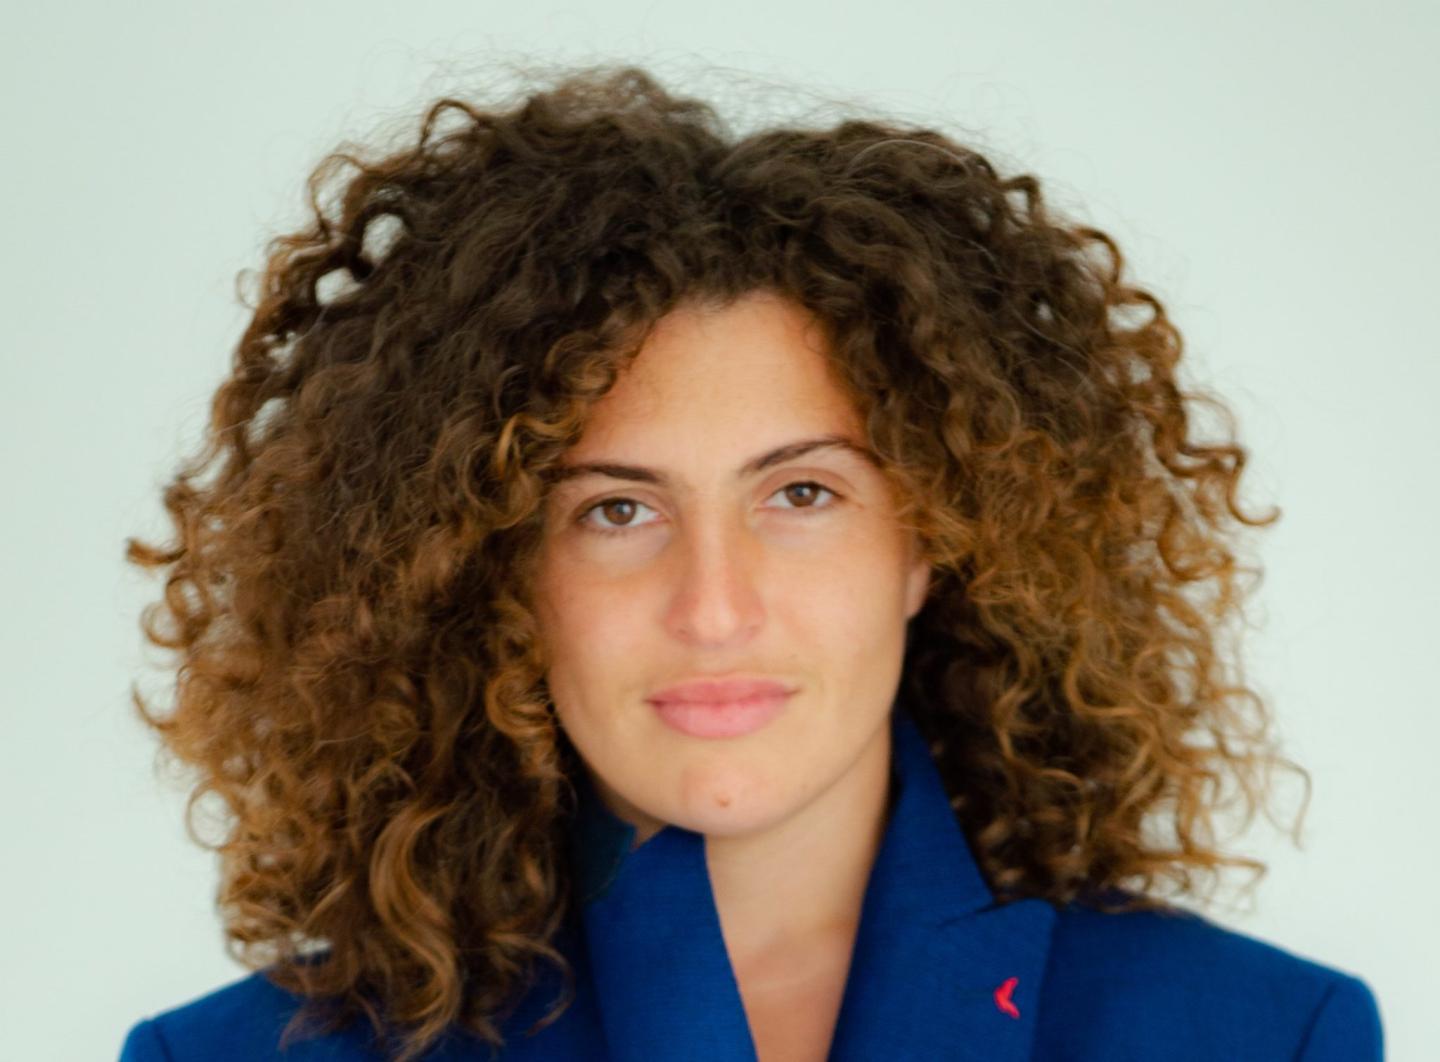 headshot of a woman with brown curly hair